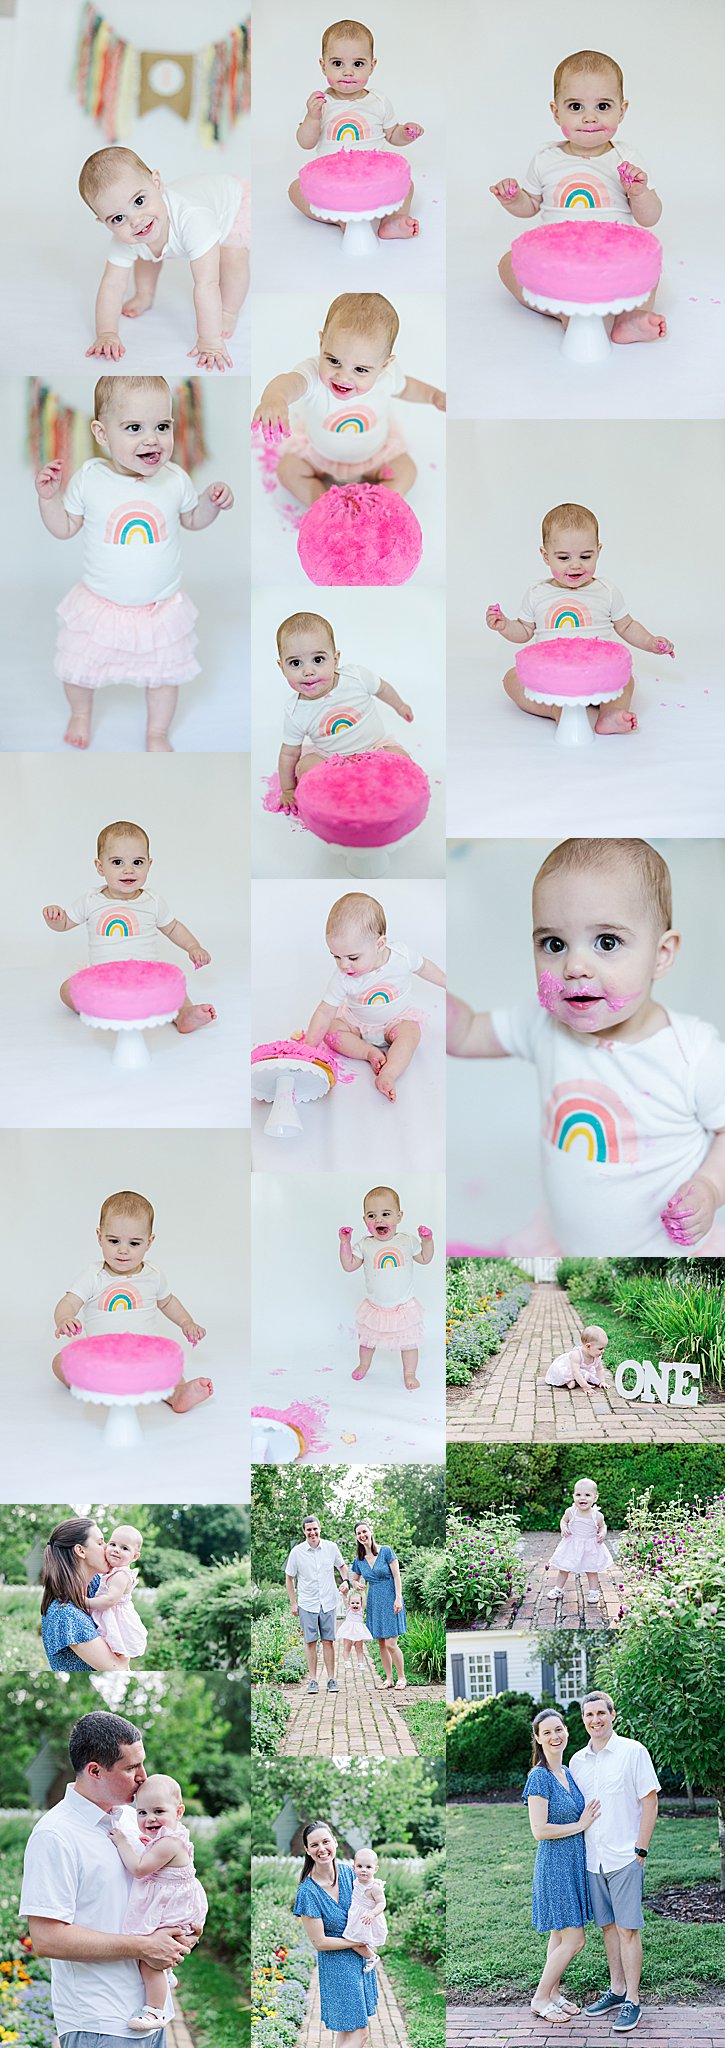 collage of images from hot pink cake smash and outdoor family session